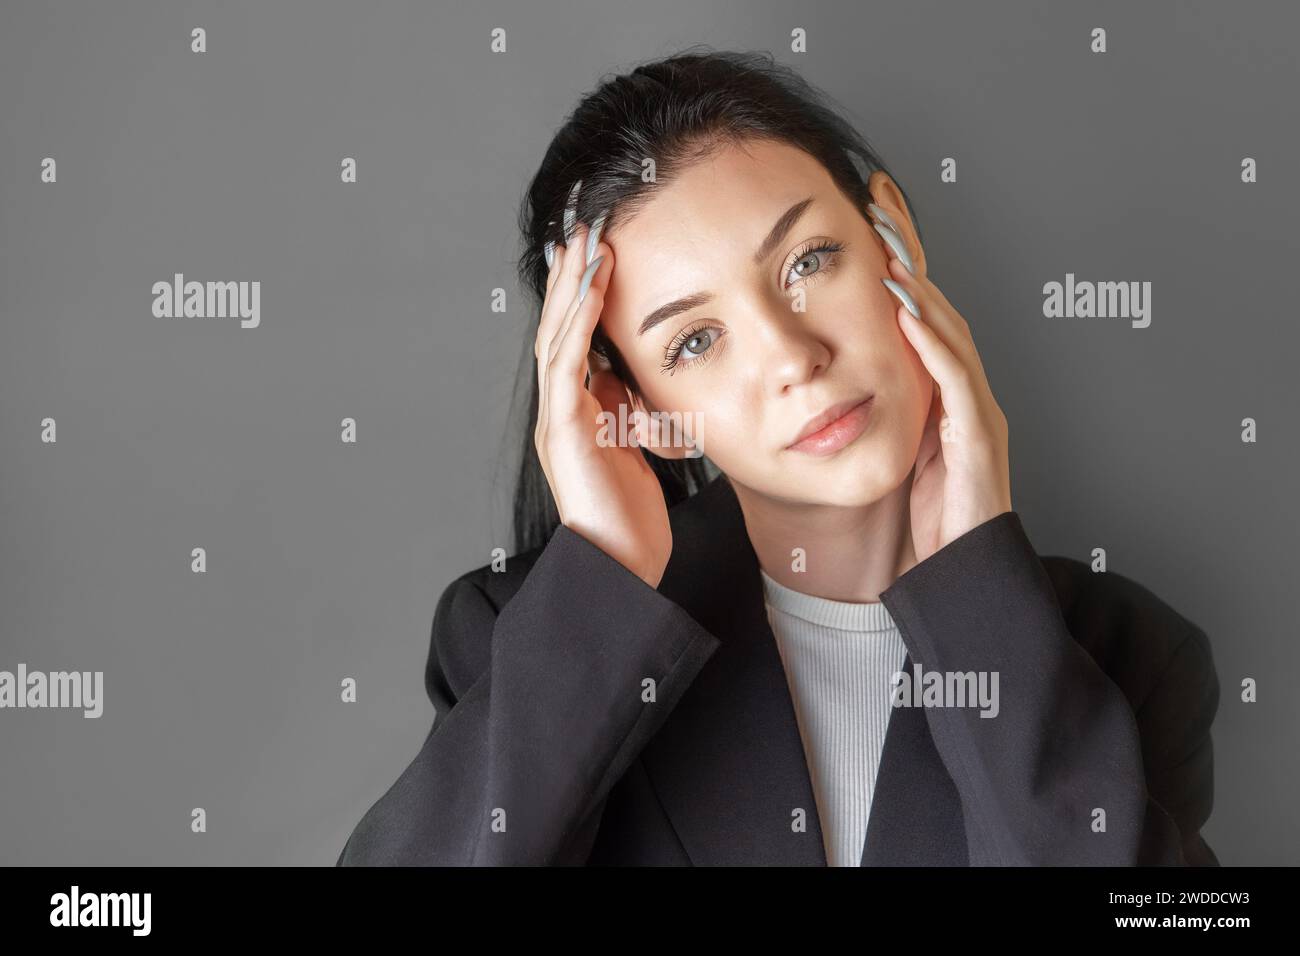 Portrait of a smiling young teenager girl. Stock Photo